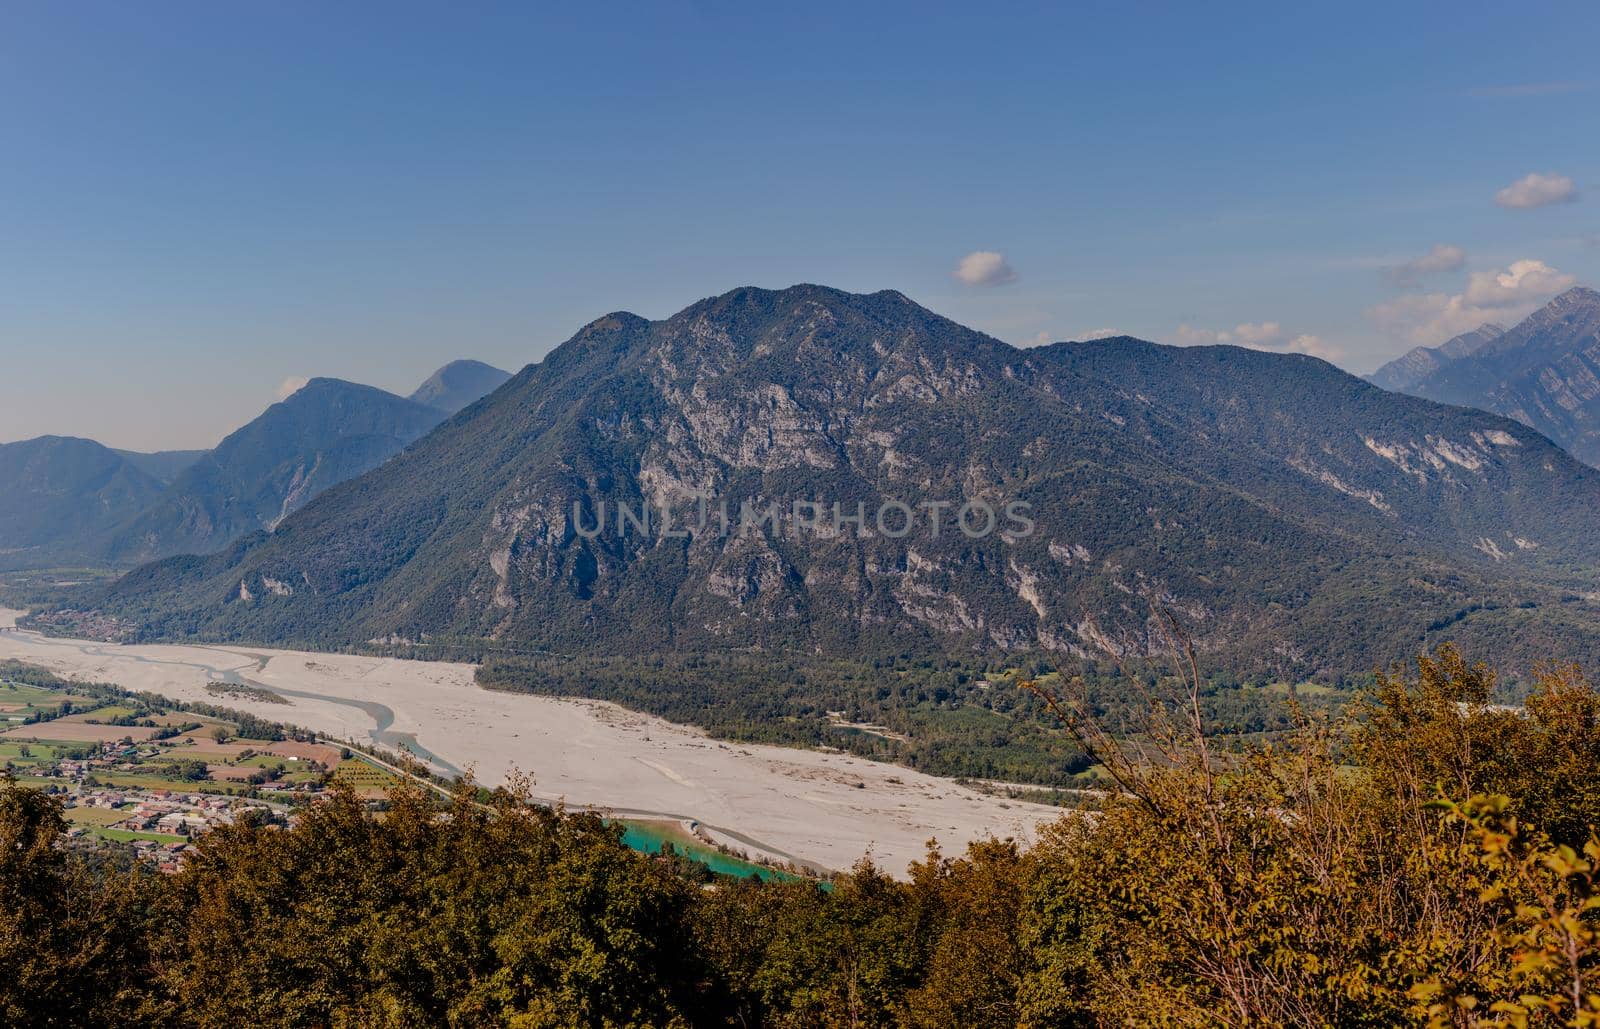 View of the Tagliamento river from the Ercole mountain, Italy